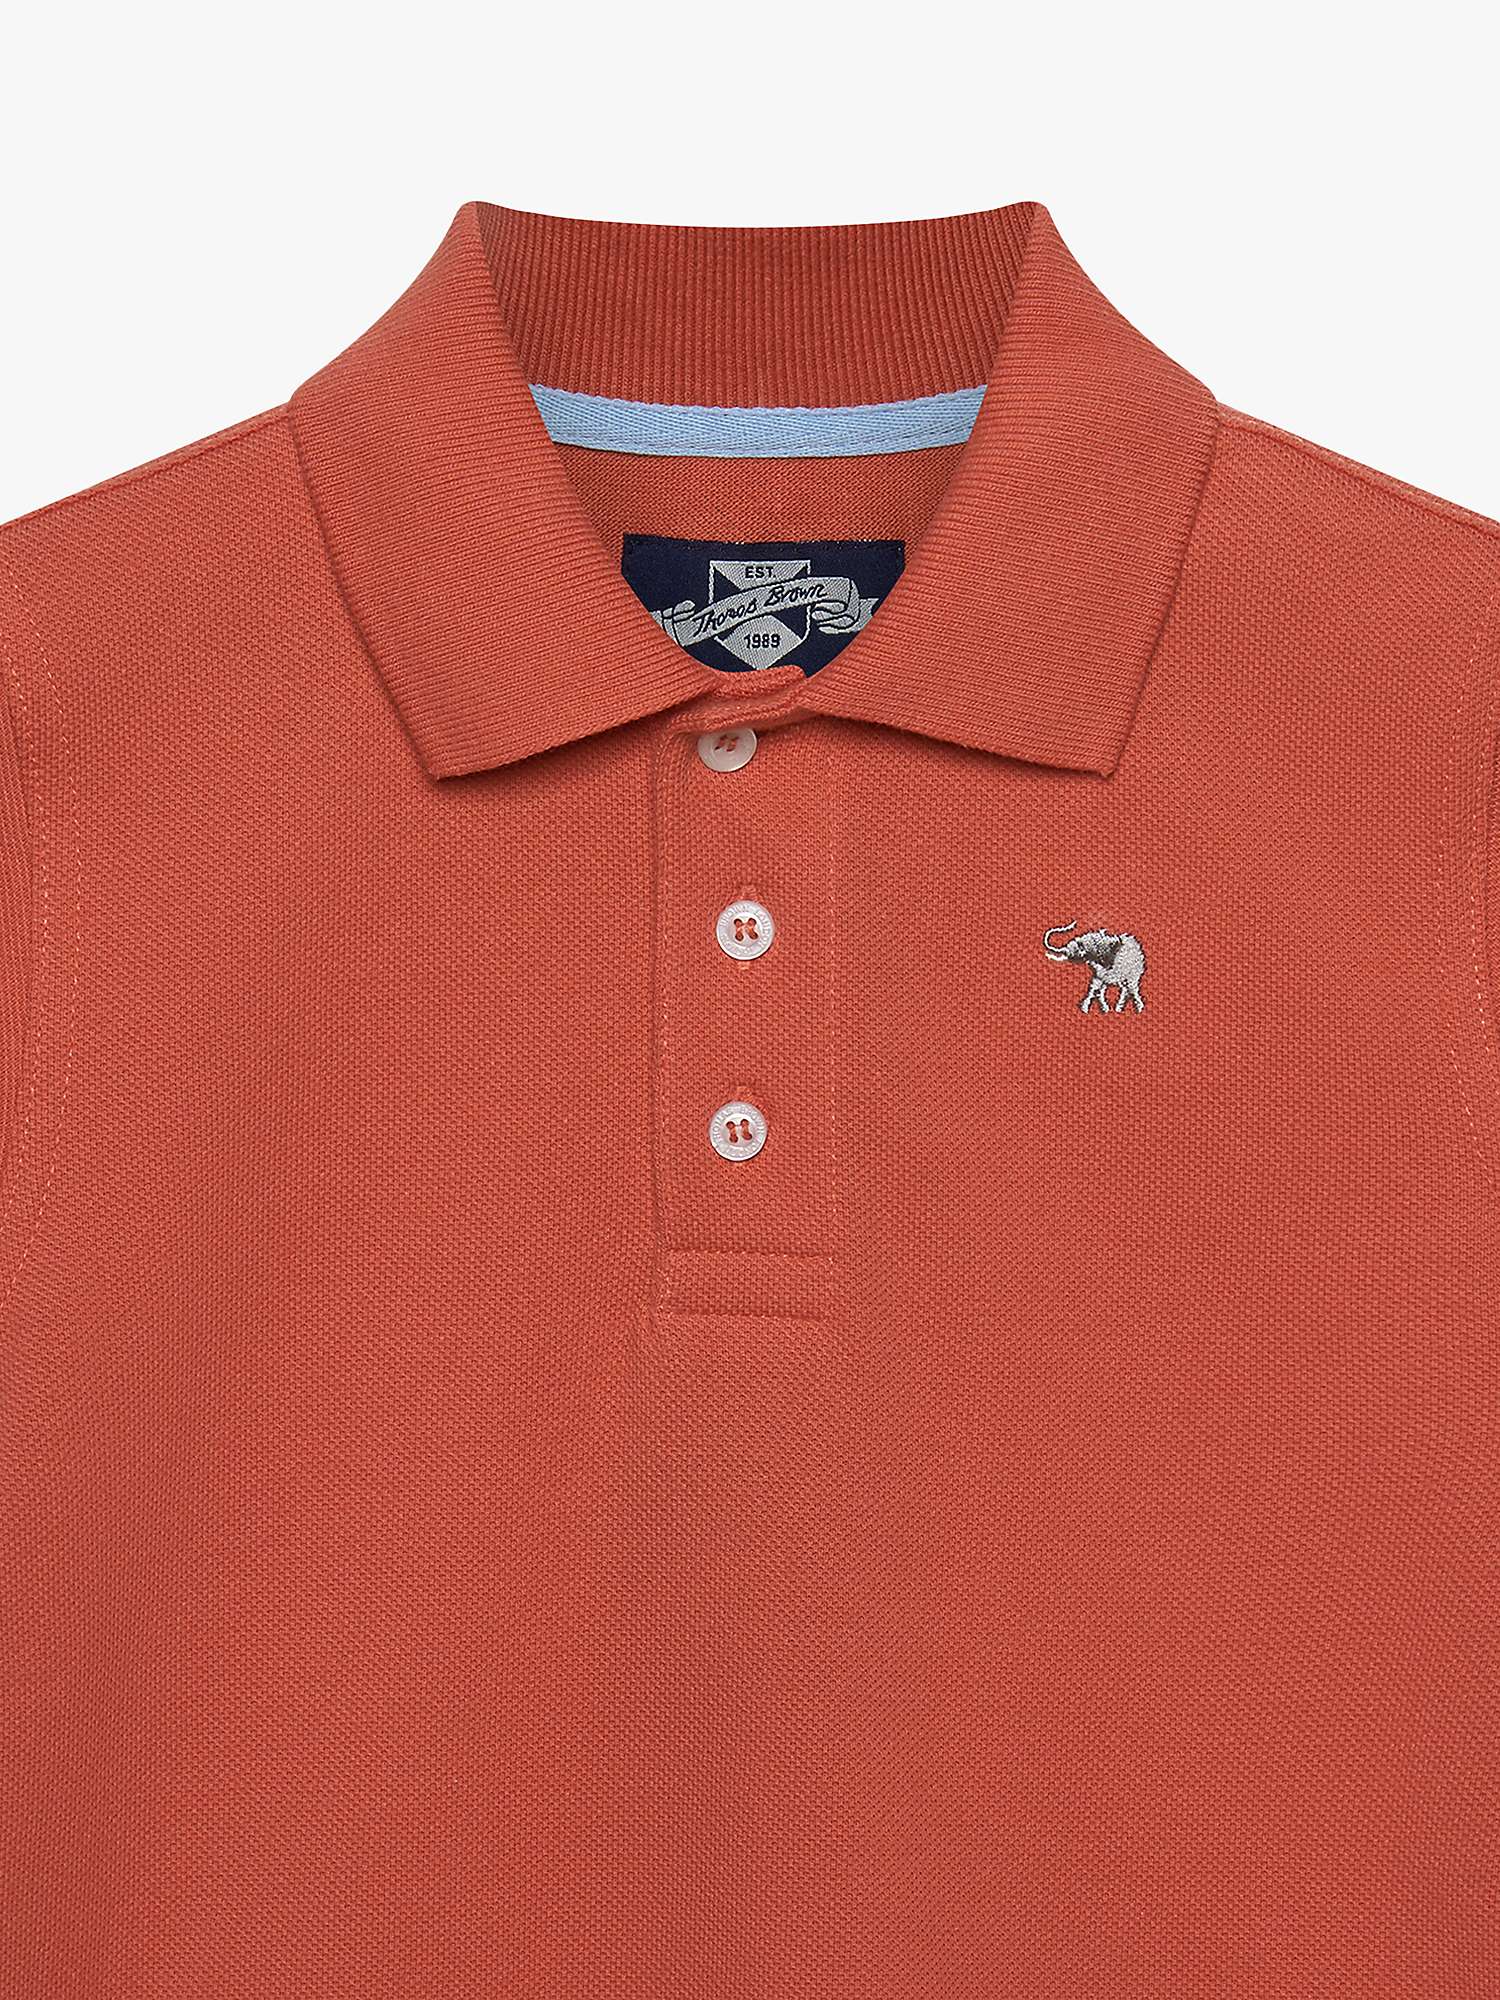 Buy Trotters Kids' Harry Pique Polo Shirt Online at johnlewis.com